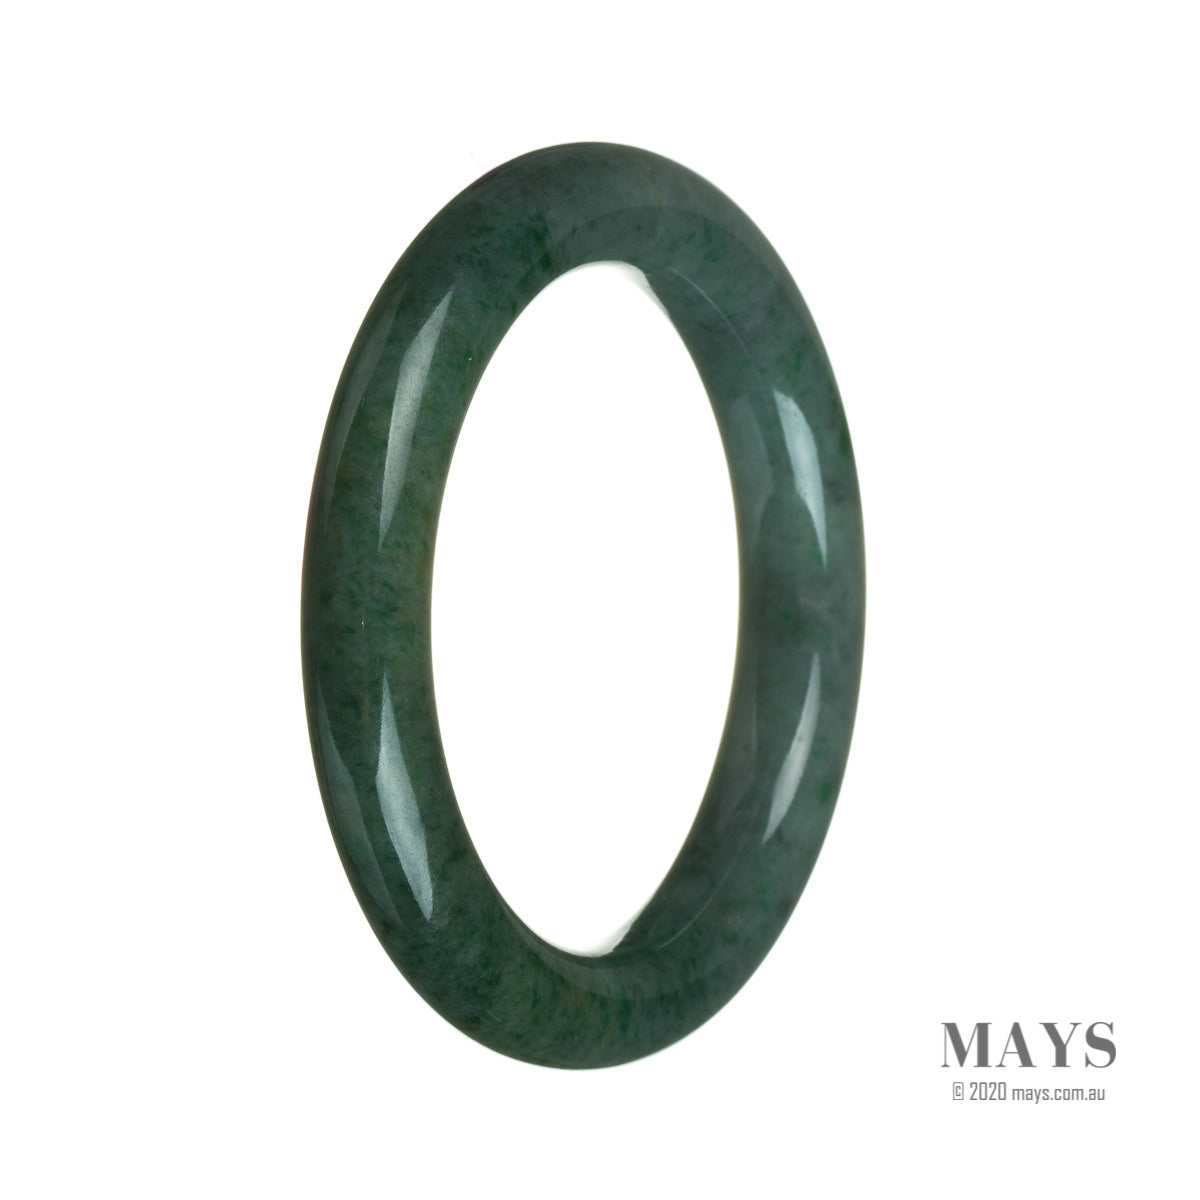 A round deep green jadeite jade bangle with a 61mm diameter, left in its natural untreated state.